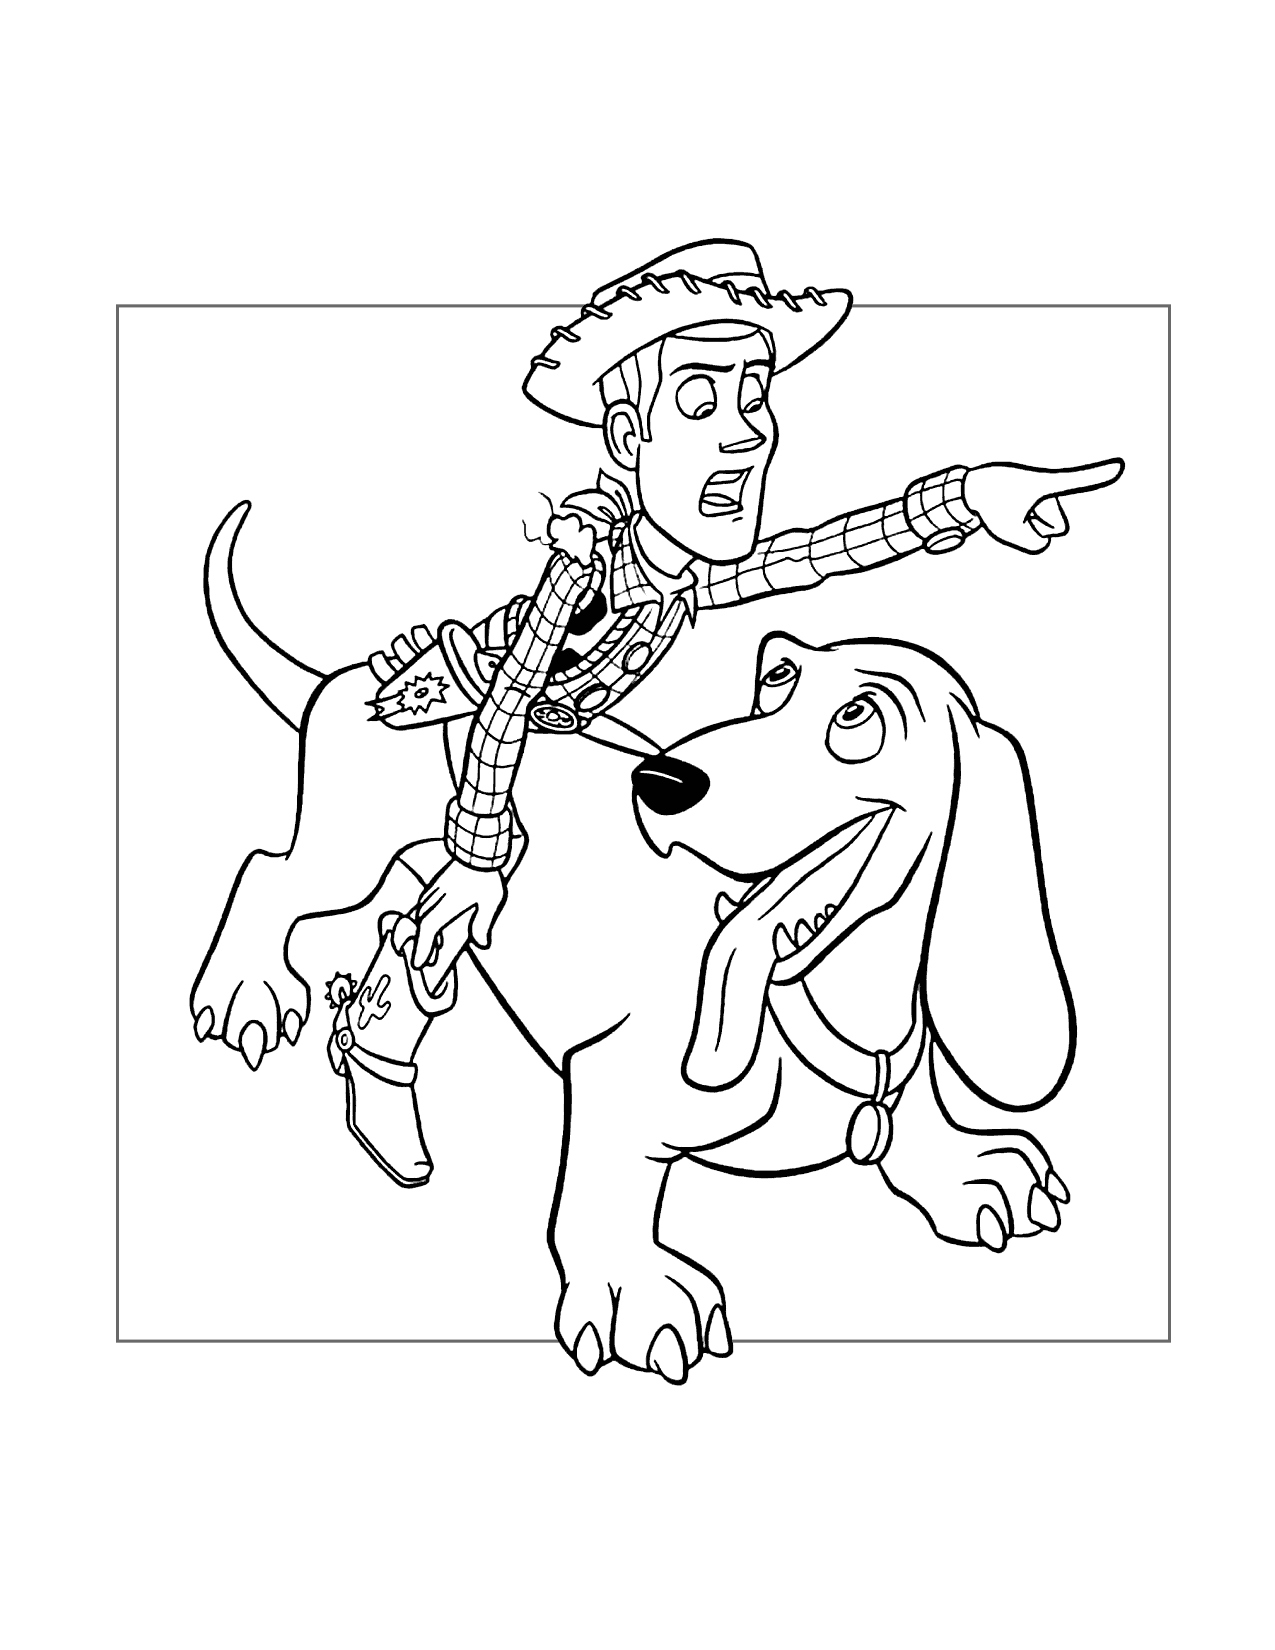 Woody And Buster Toy Story Coloring Page